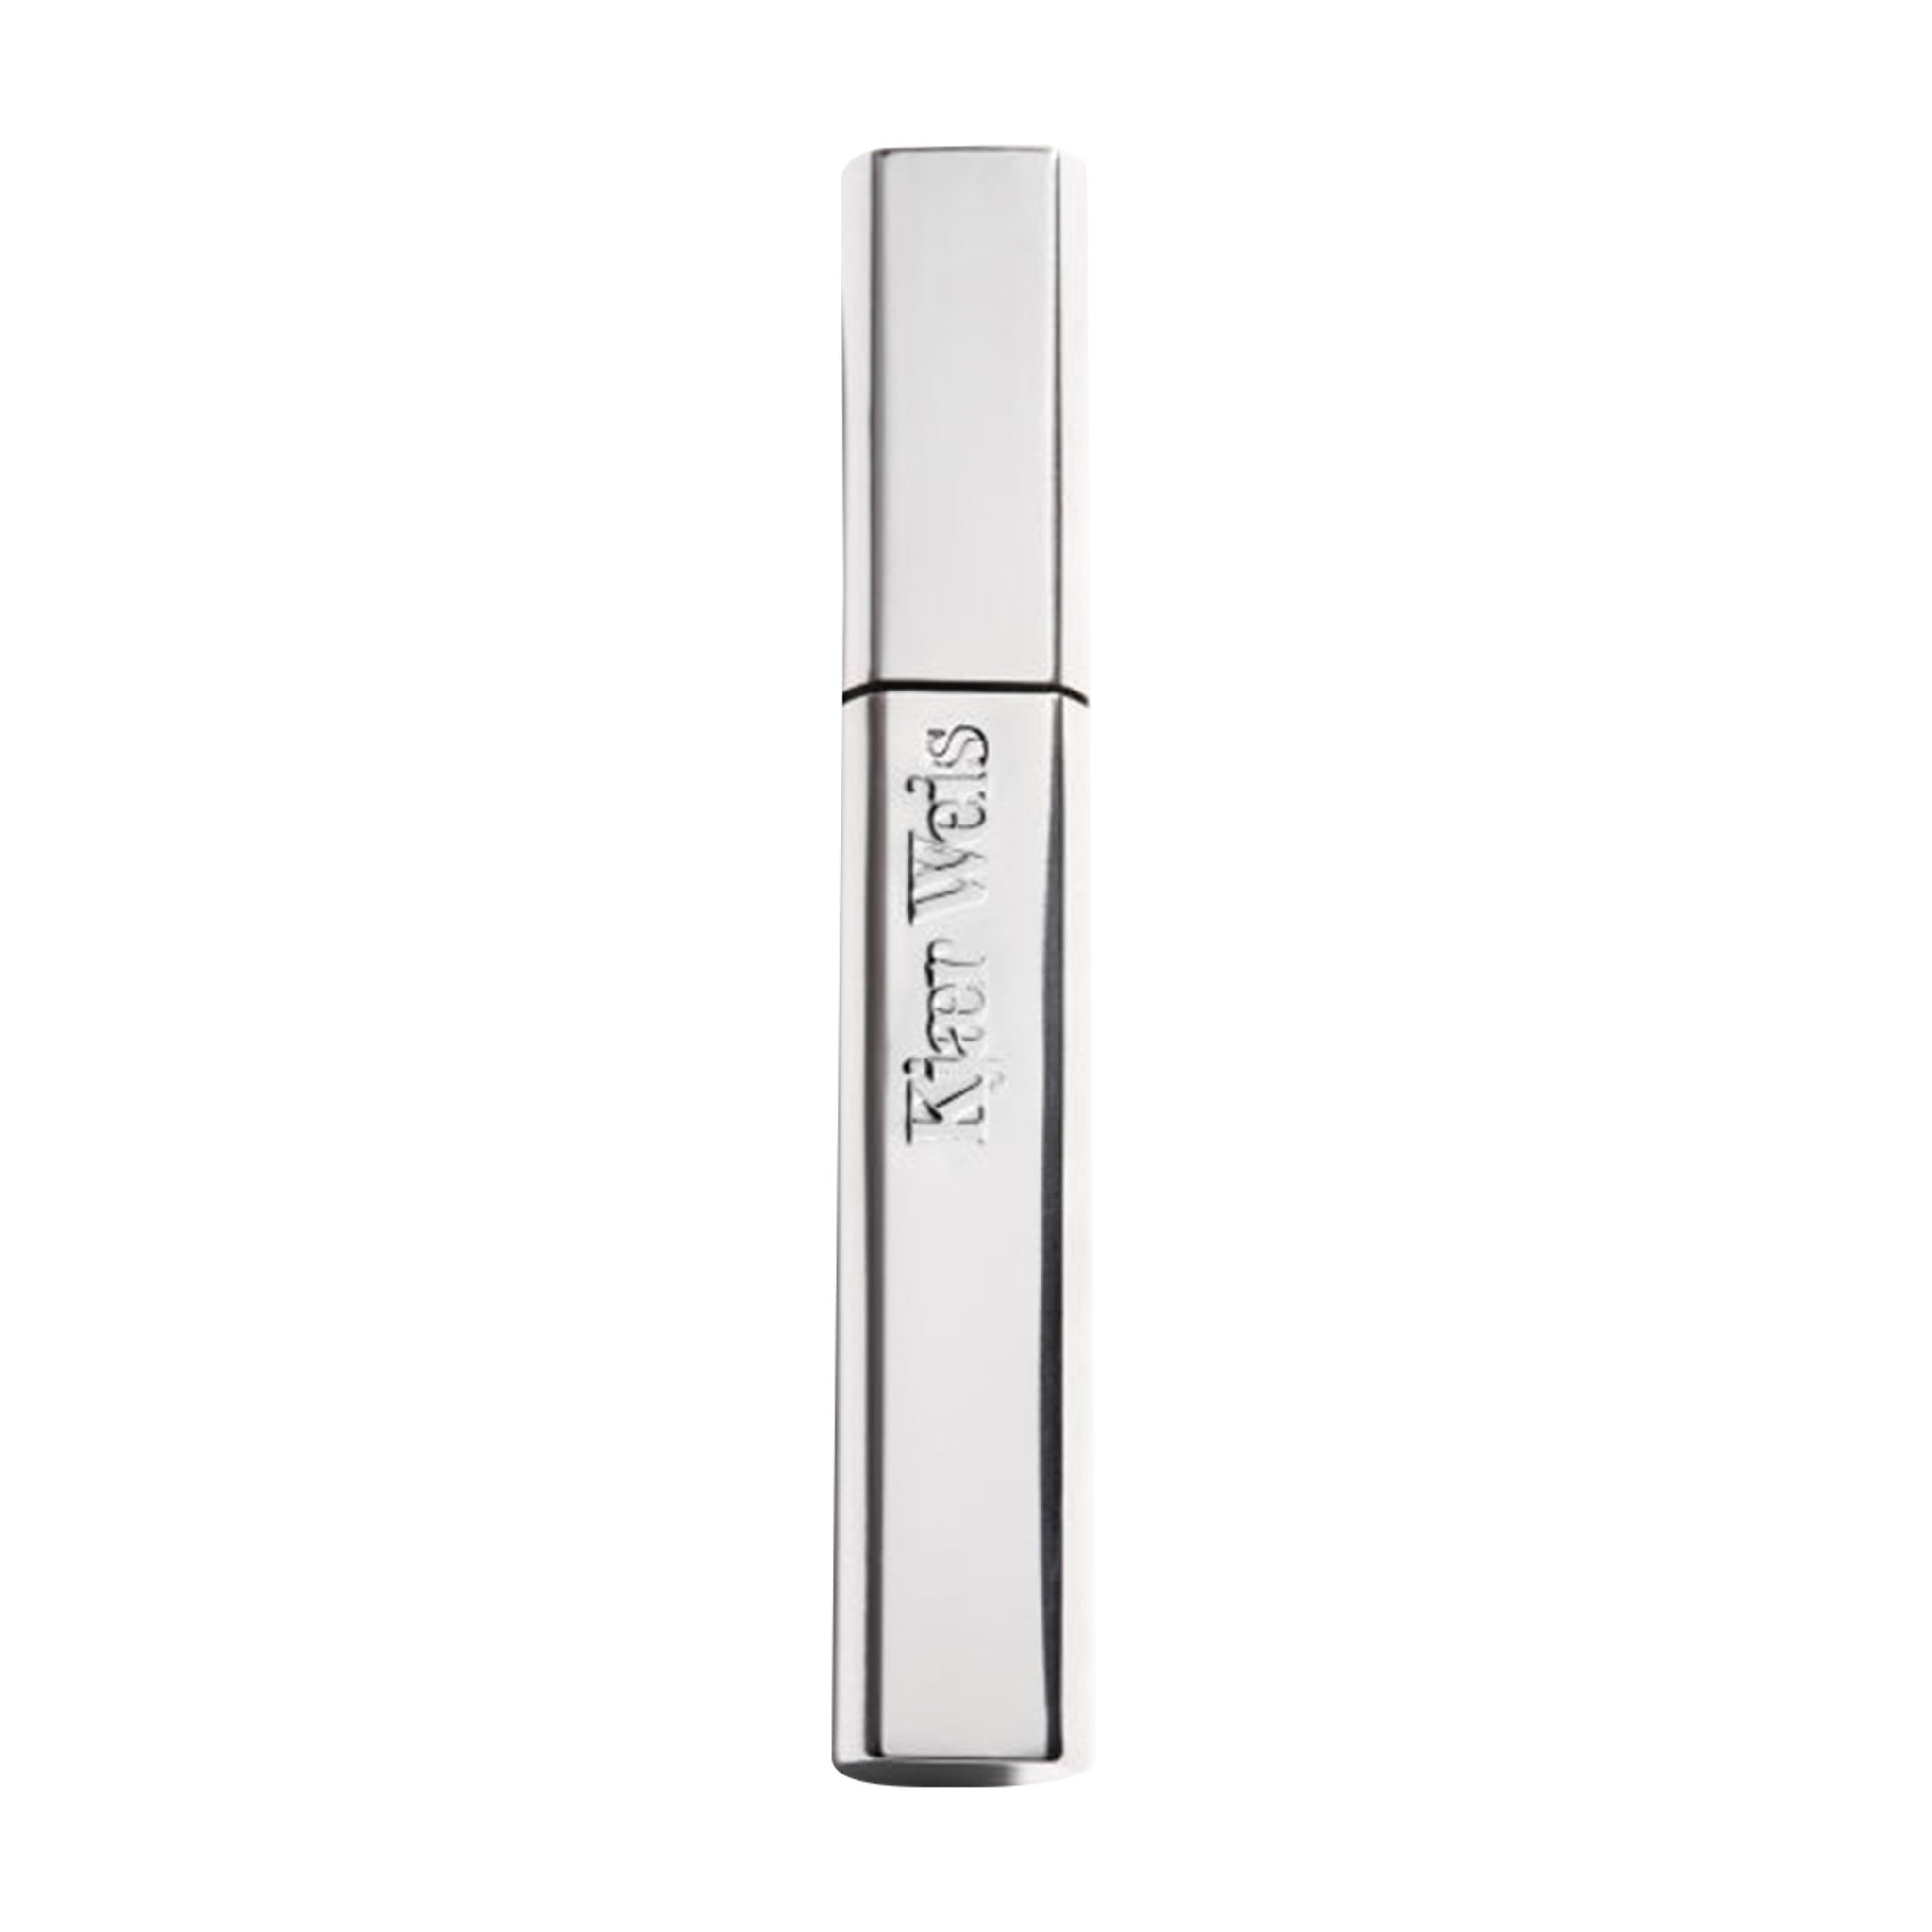 Kjaer Weis Volumizing Mascara main image. This product is in the color black